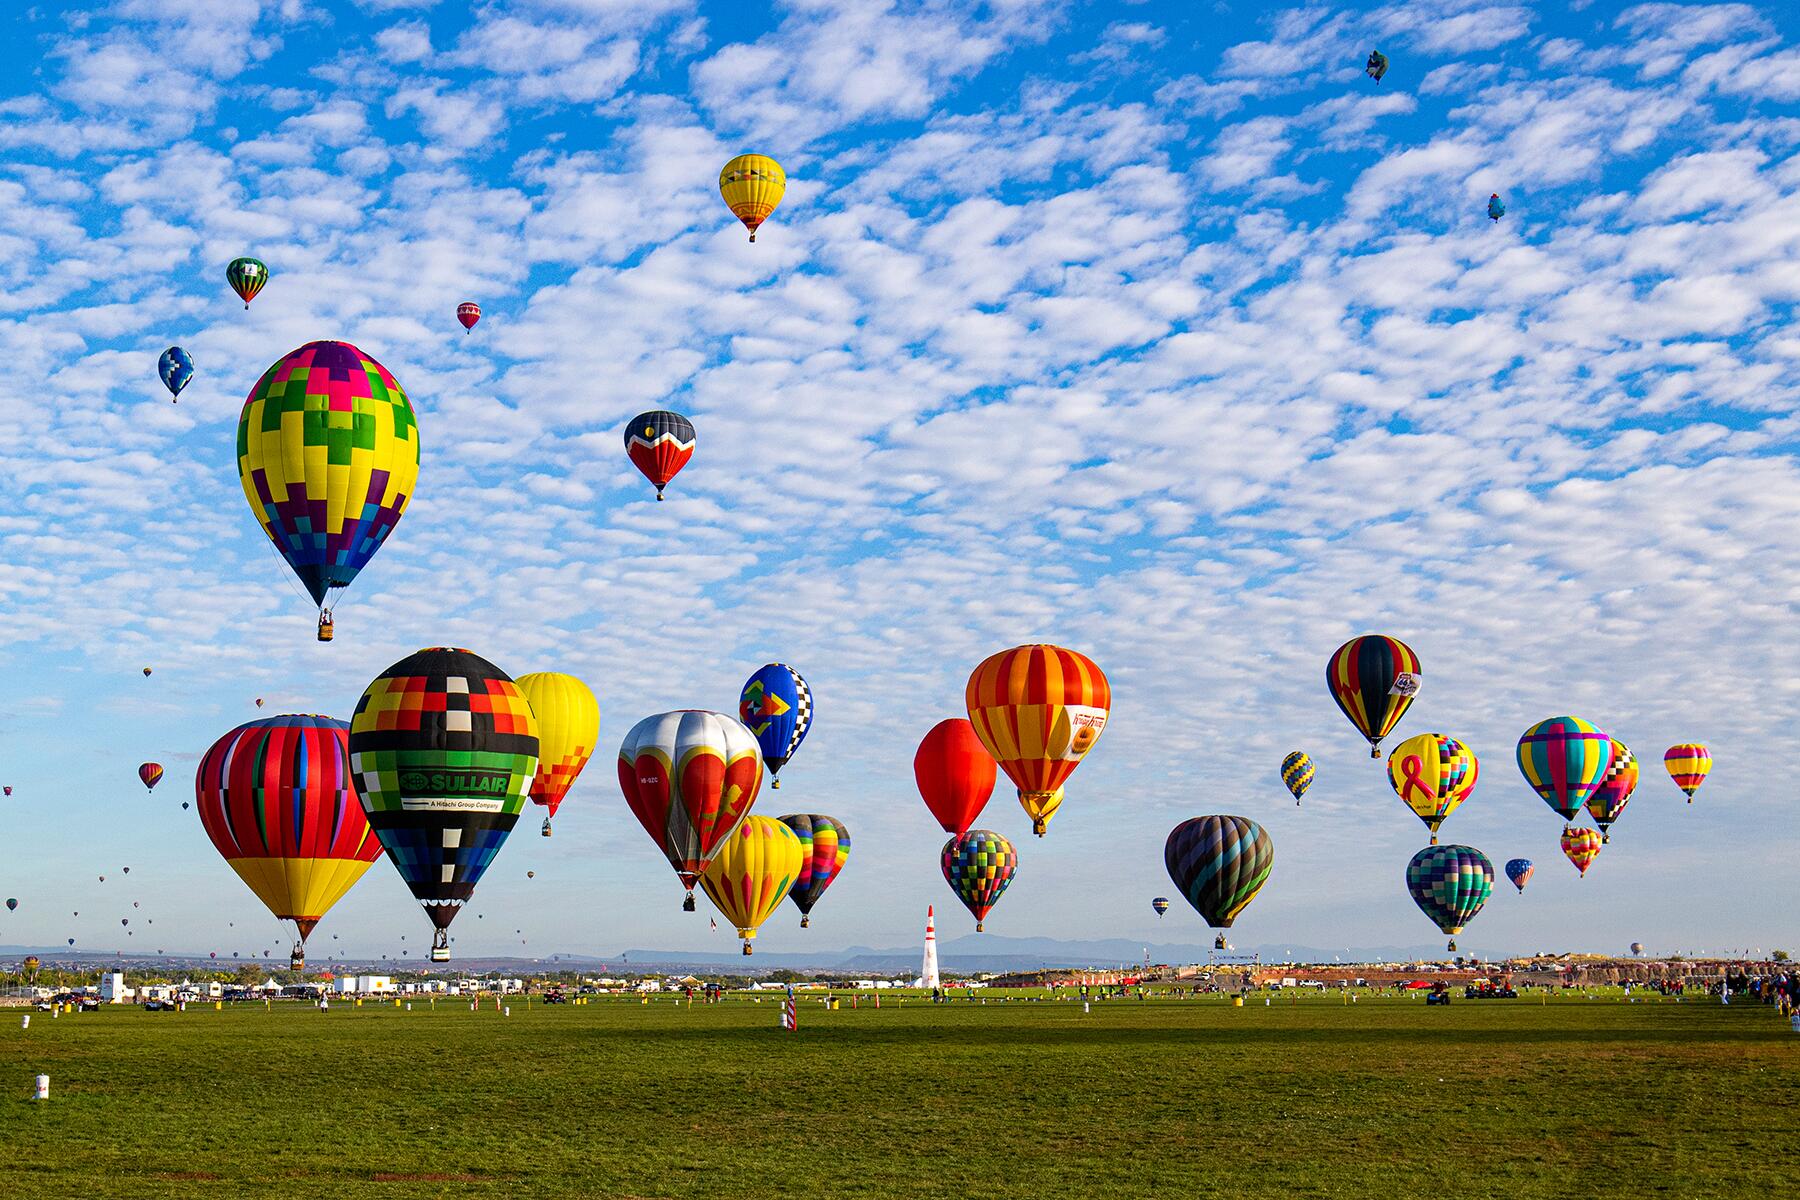 bekennen Succes Absorberen Albuquerque Balloon Festival: Here's What You Must Know